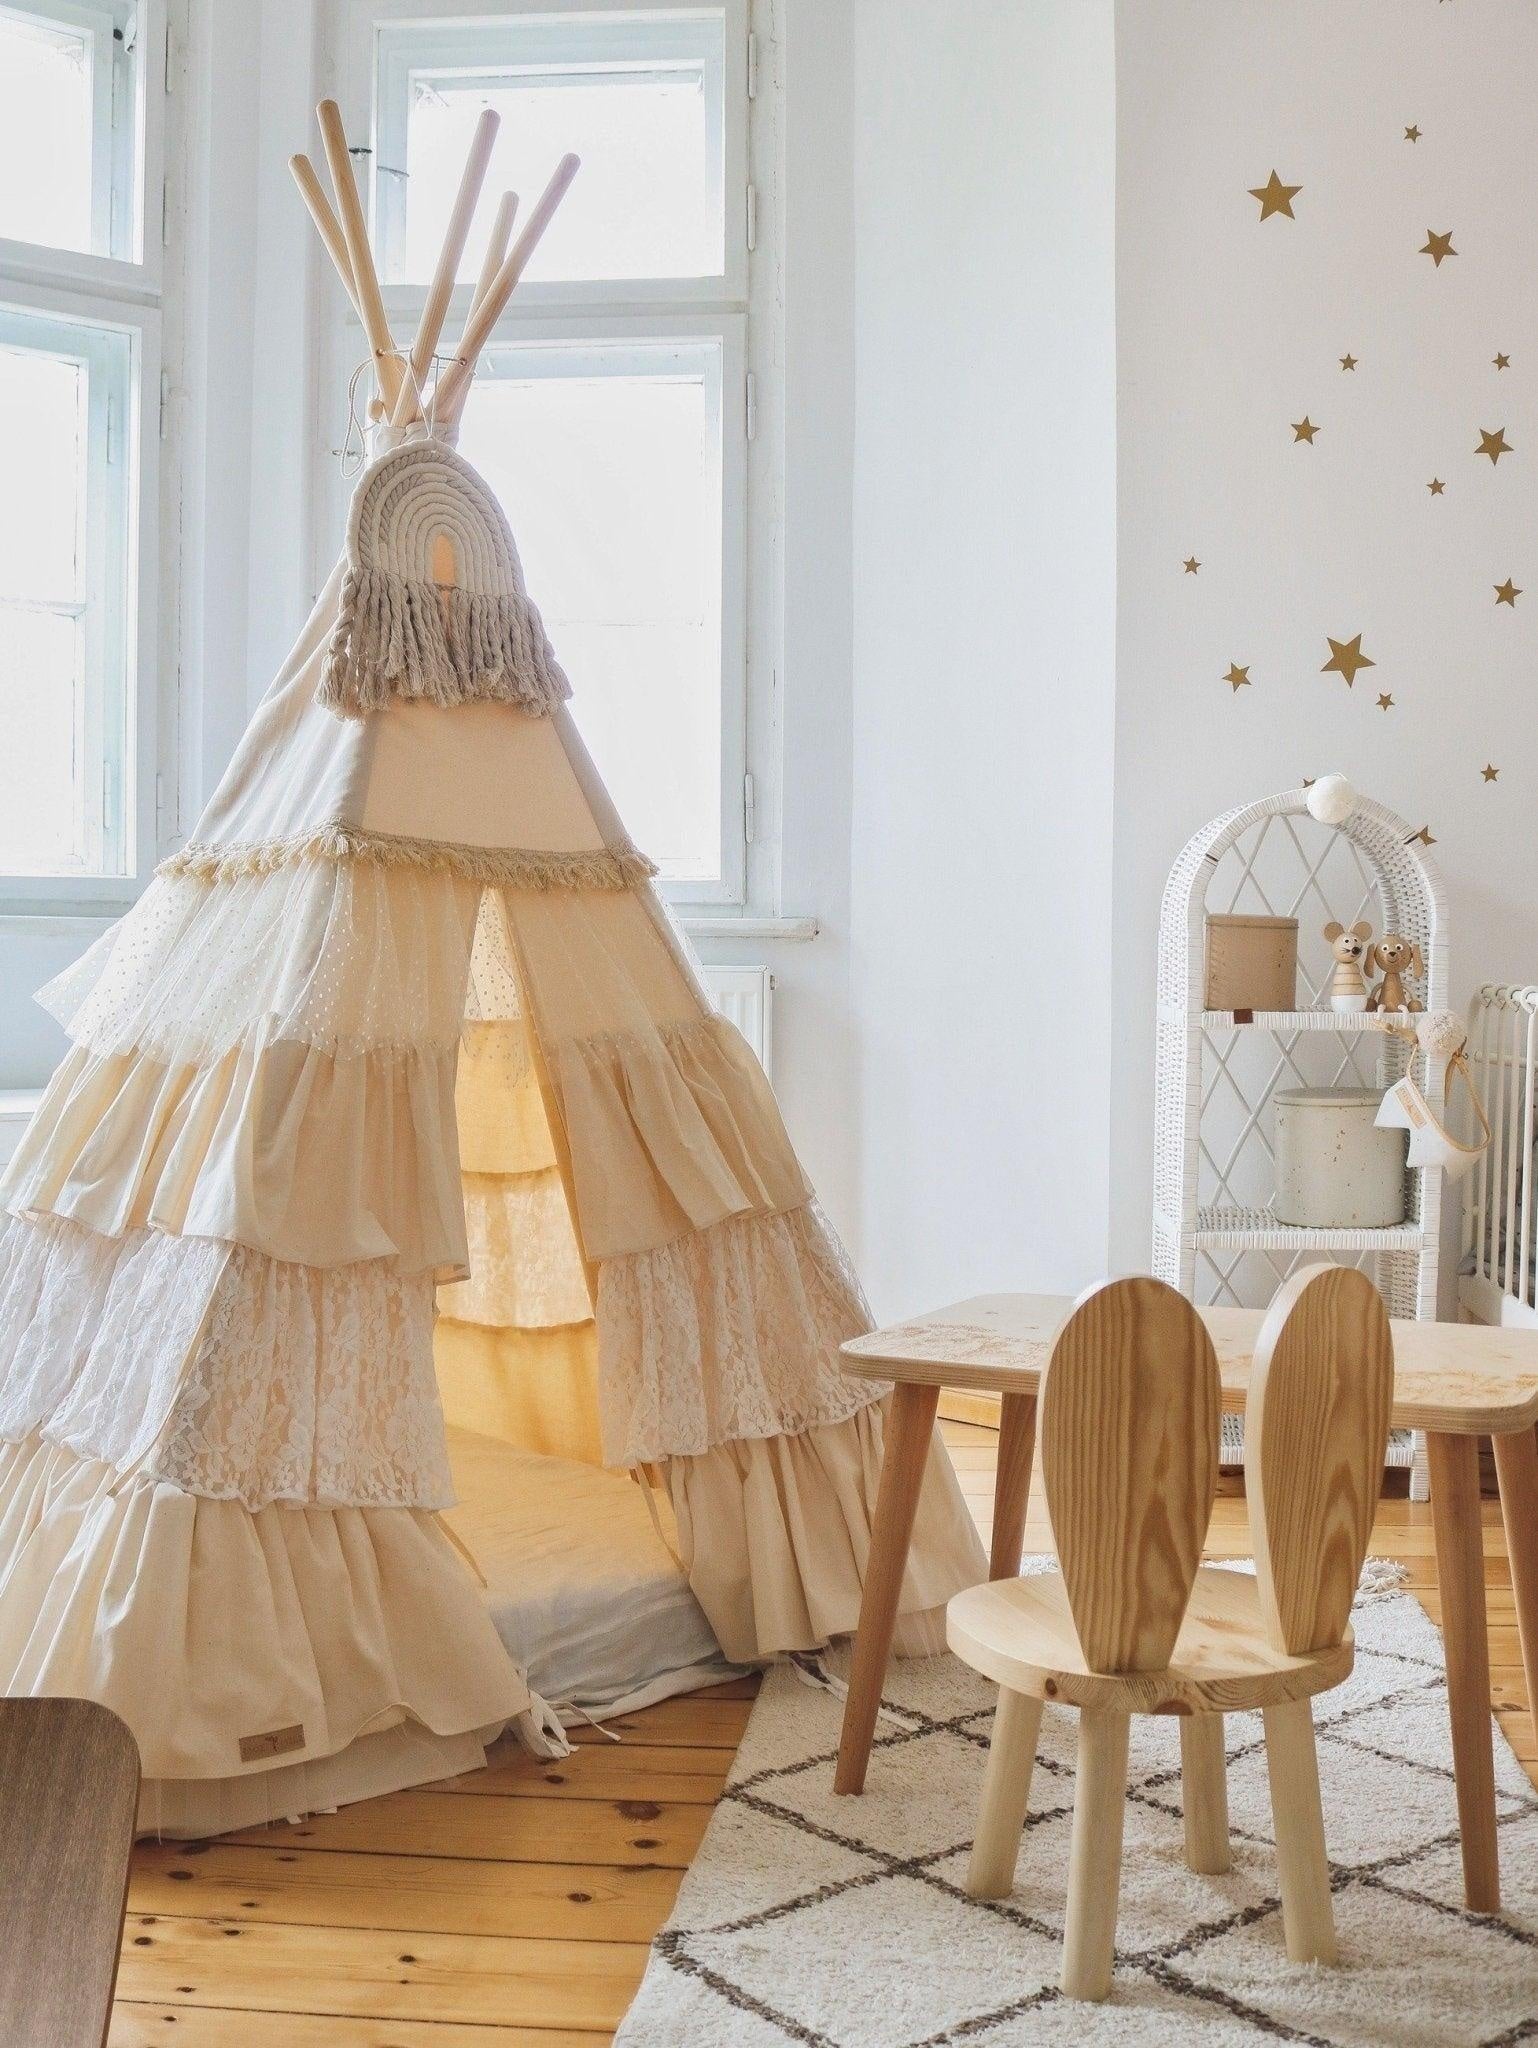 “Shabby Chic” Teepee Tent with Frills - Moi Mili